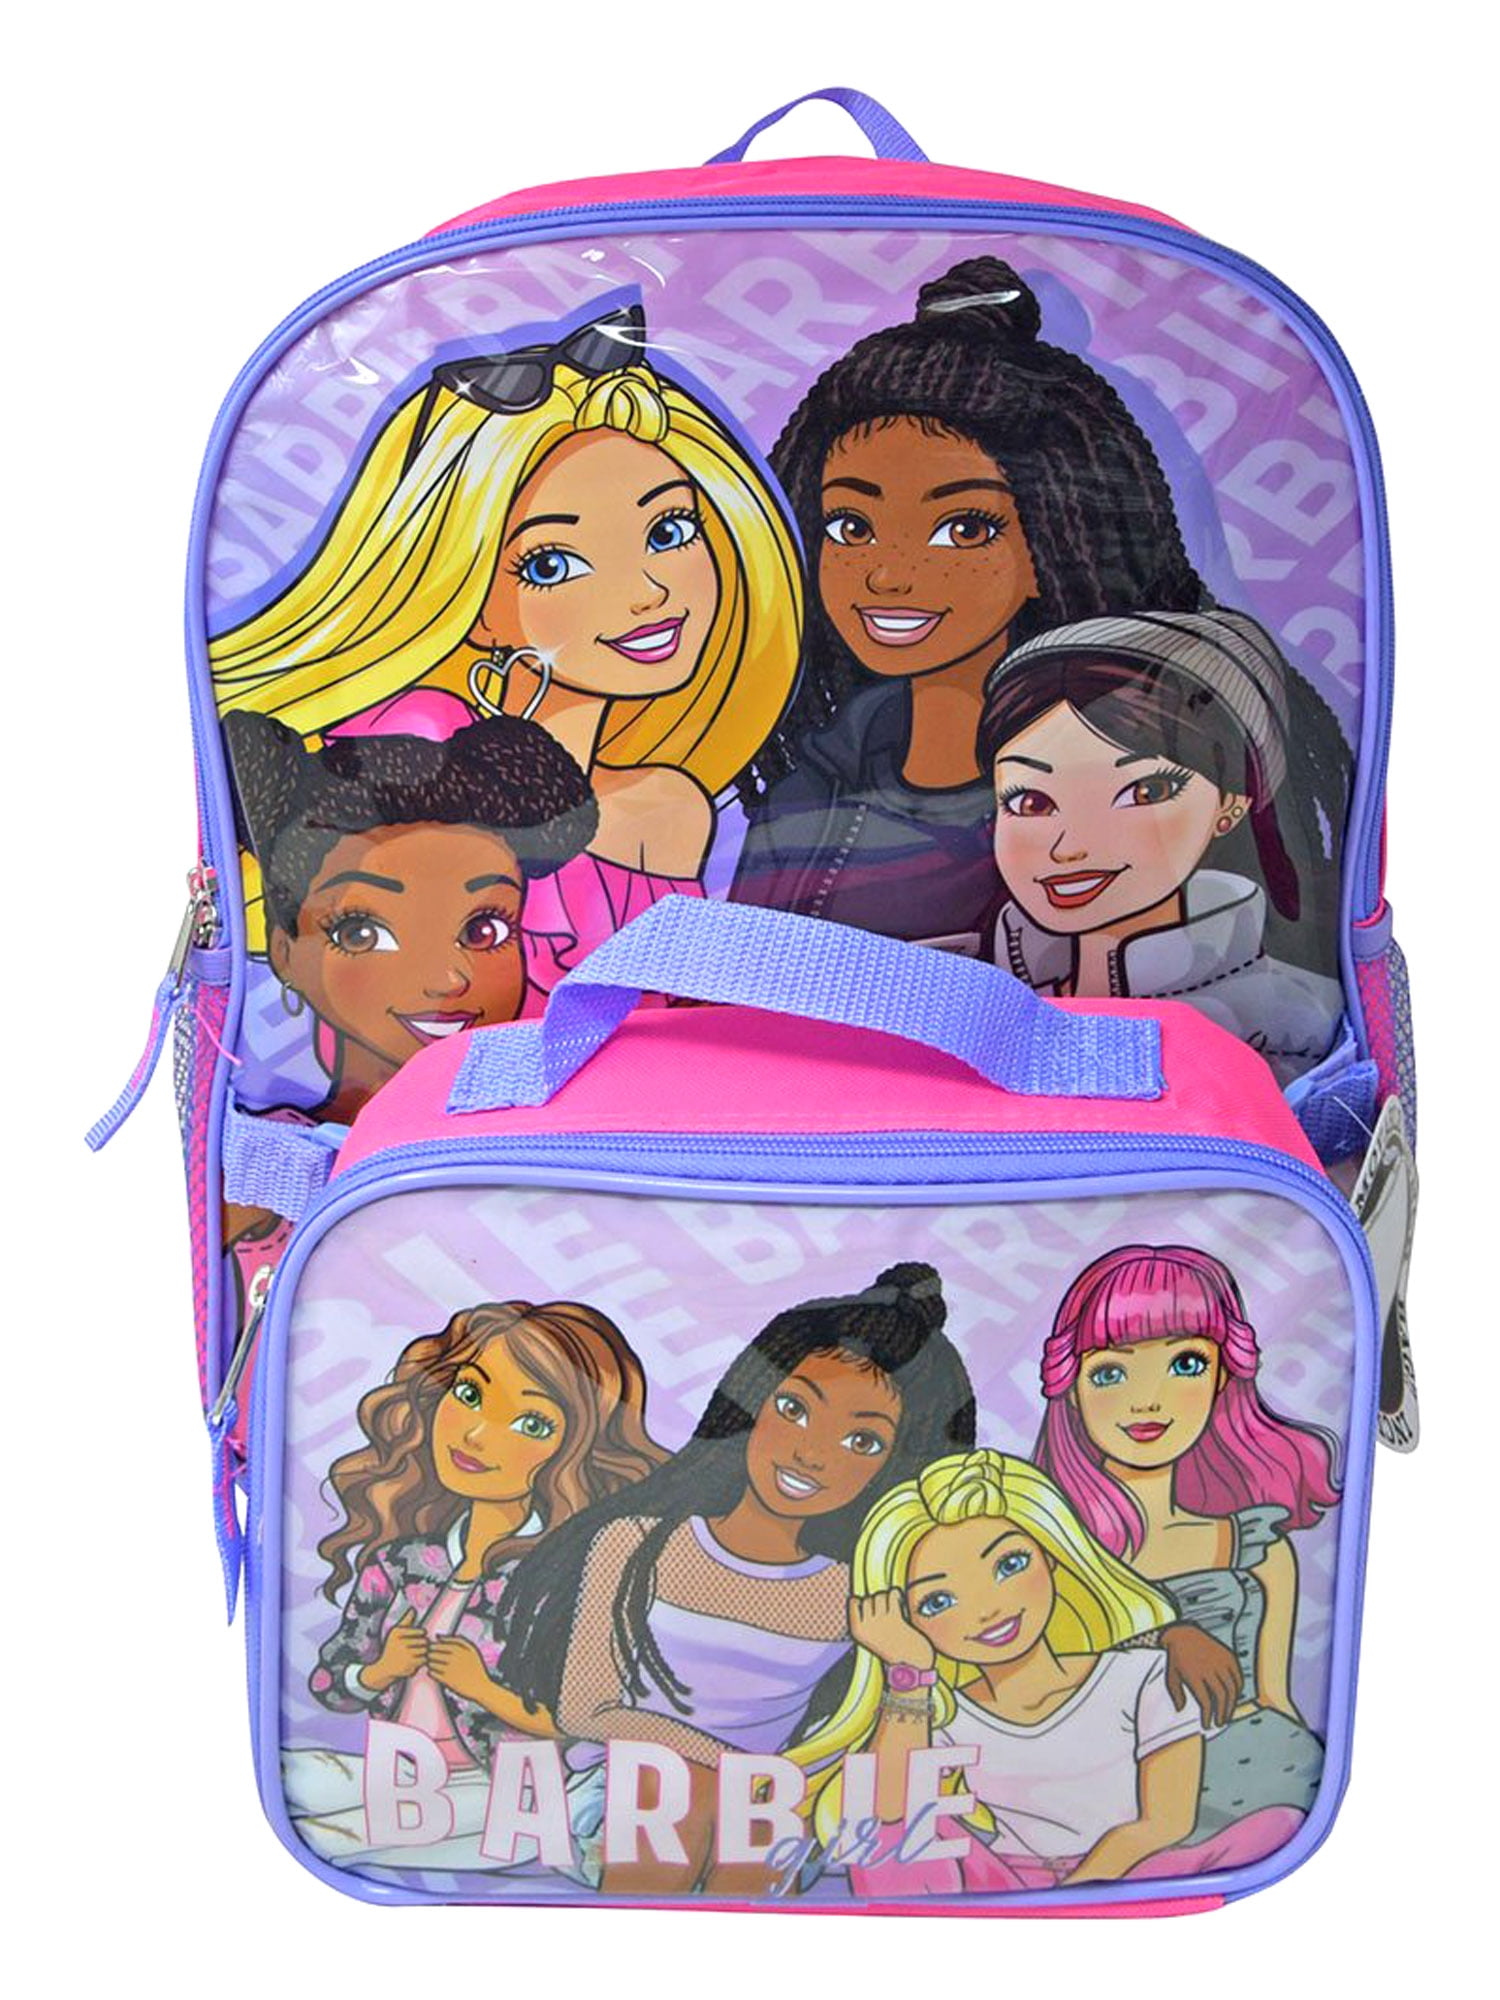 Barbie Backpack 16 & Insulated Lunch Bag Detachable Pink 2-Piece